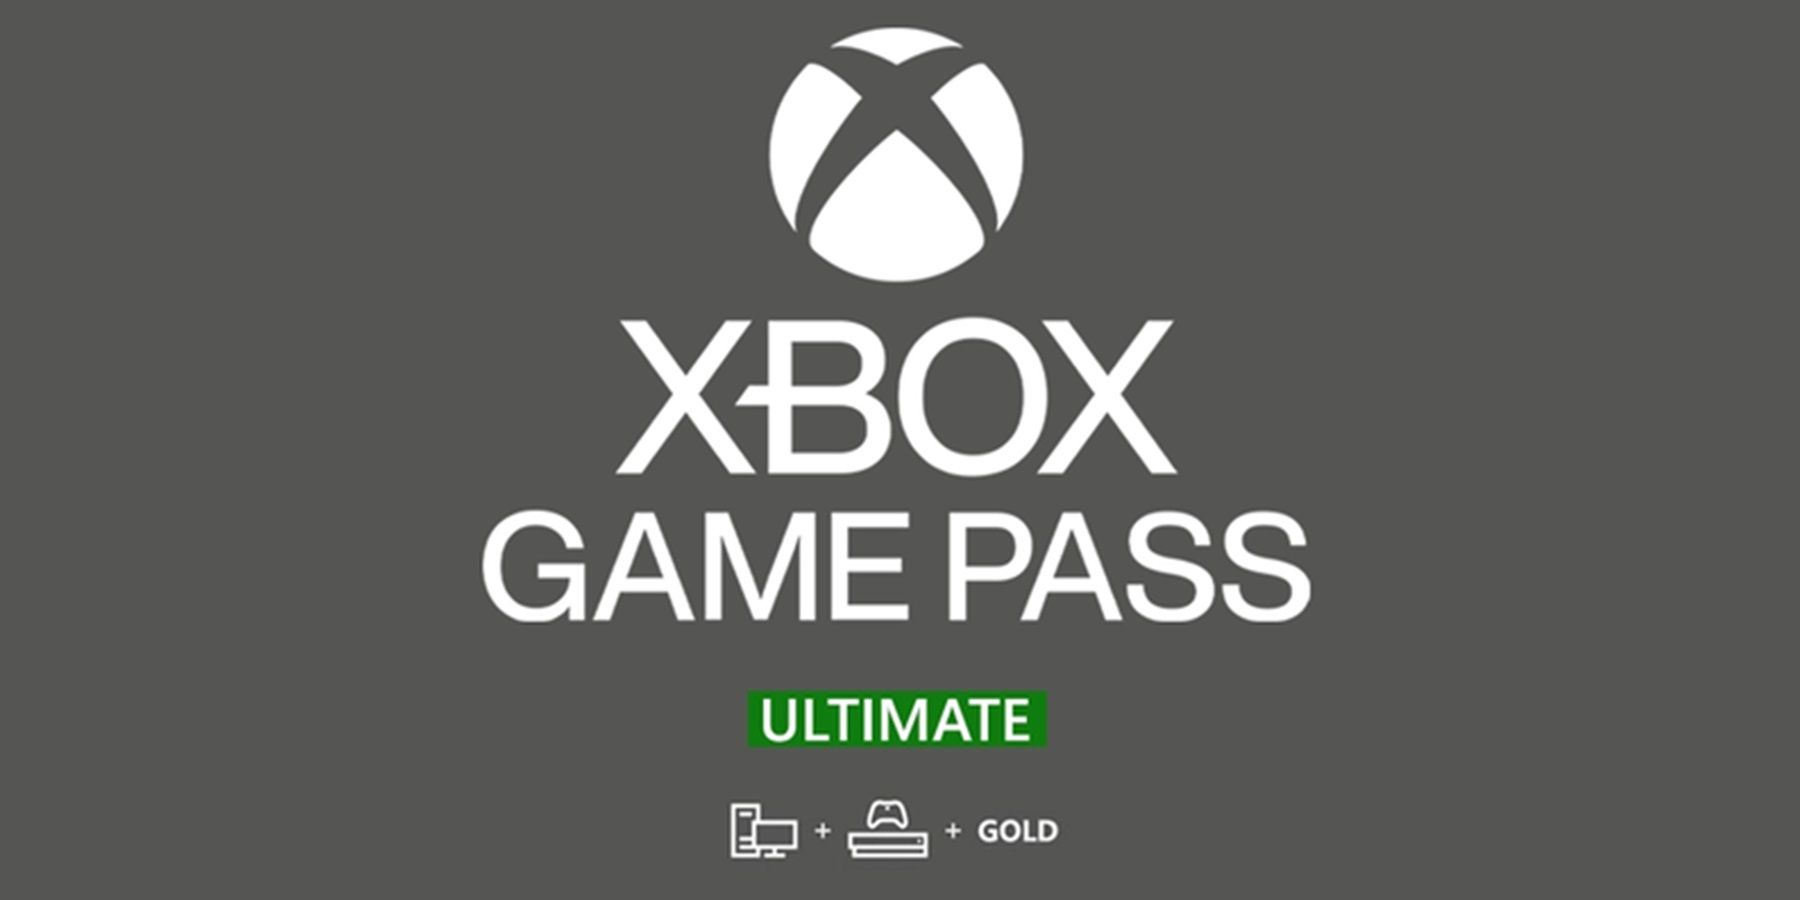 xbox game pass ultimate logo grey background